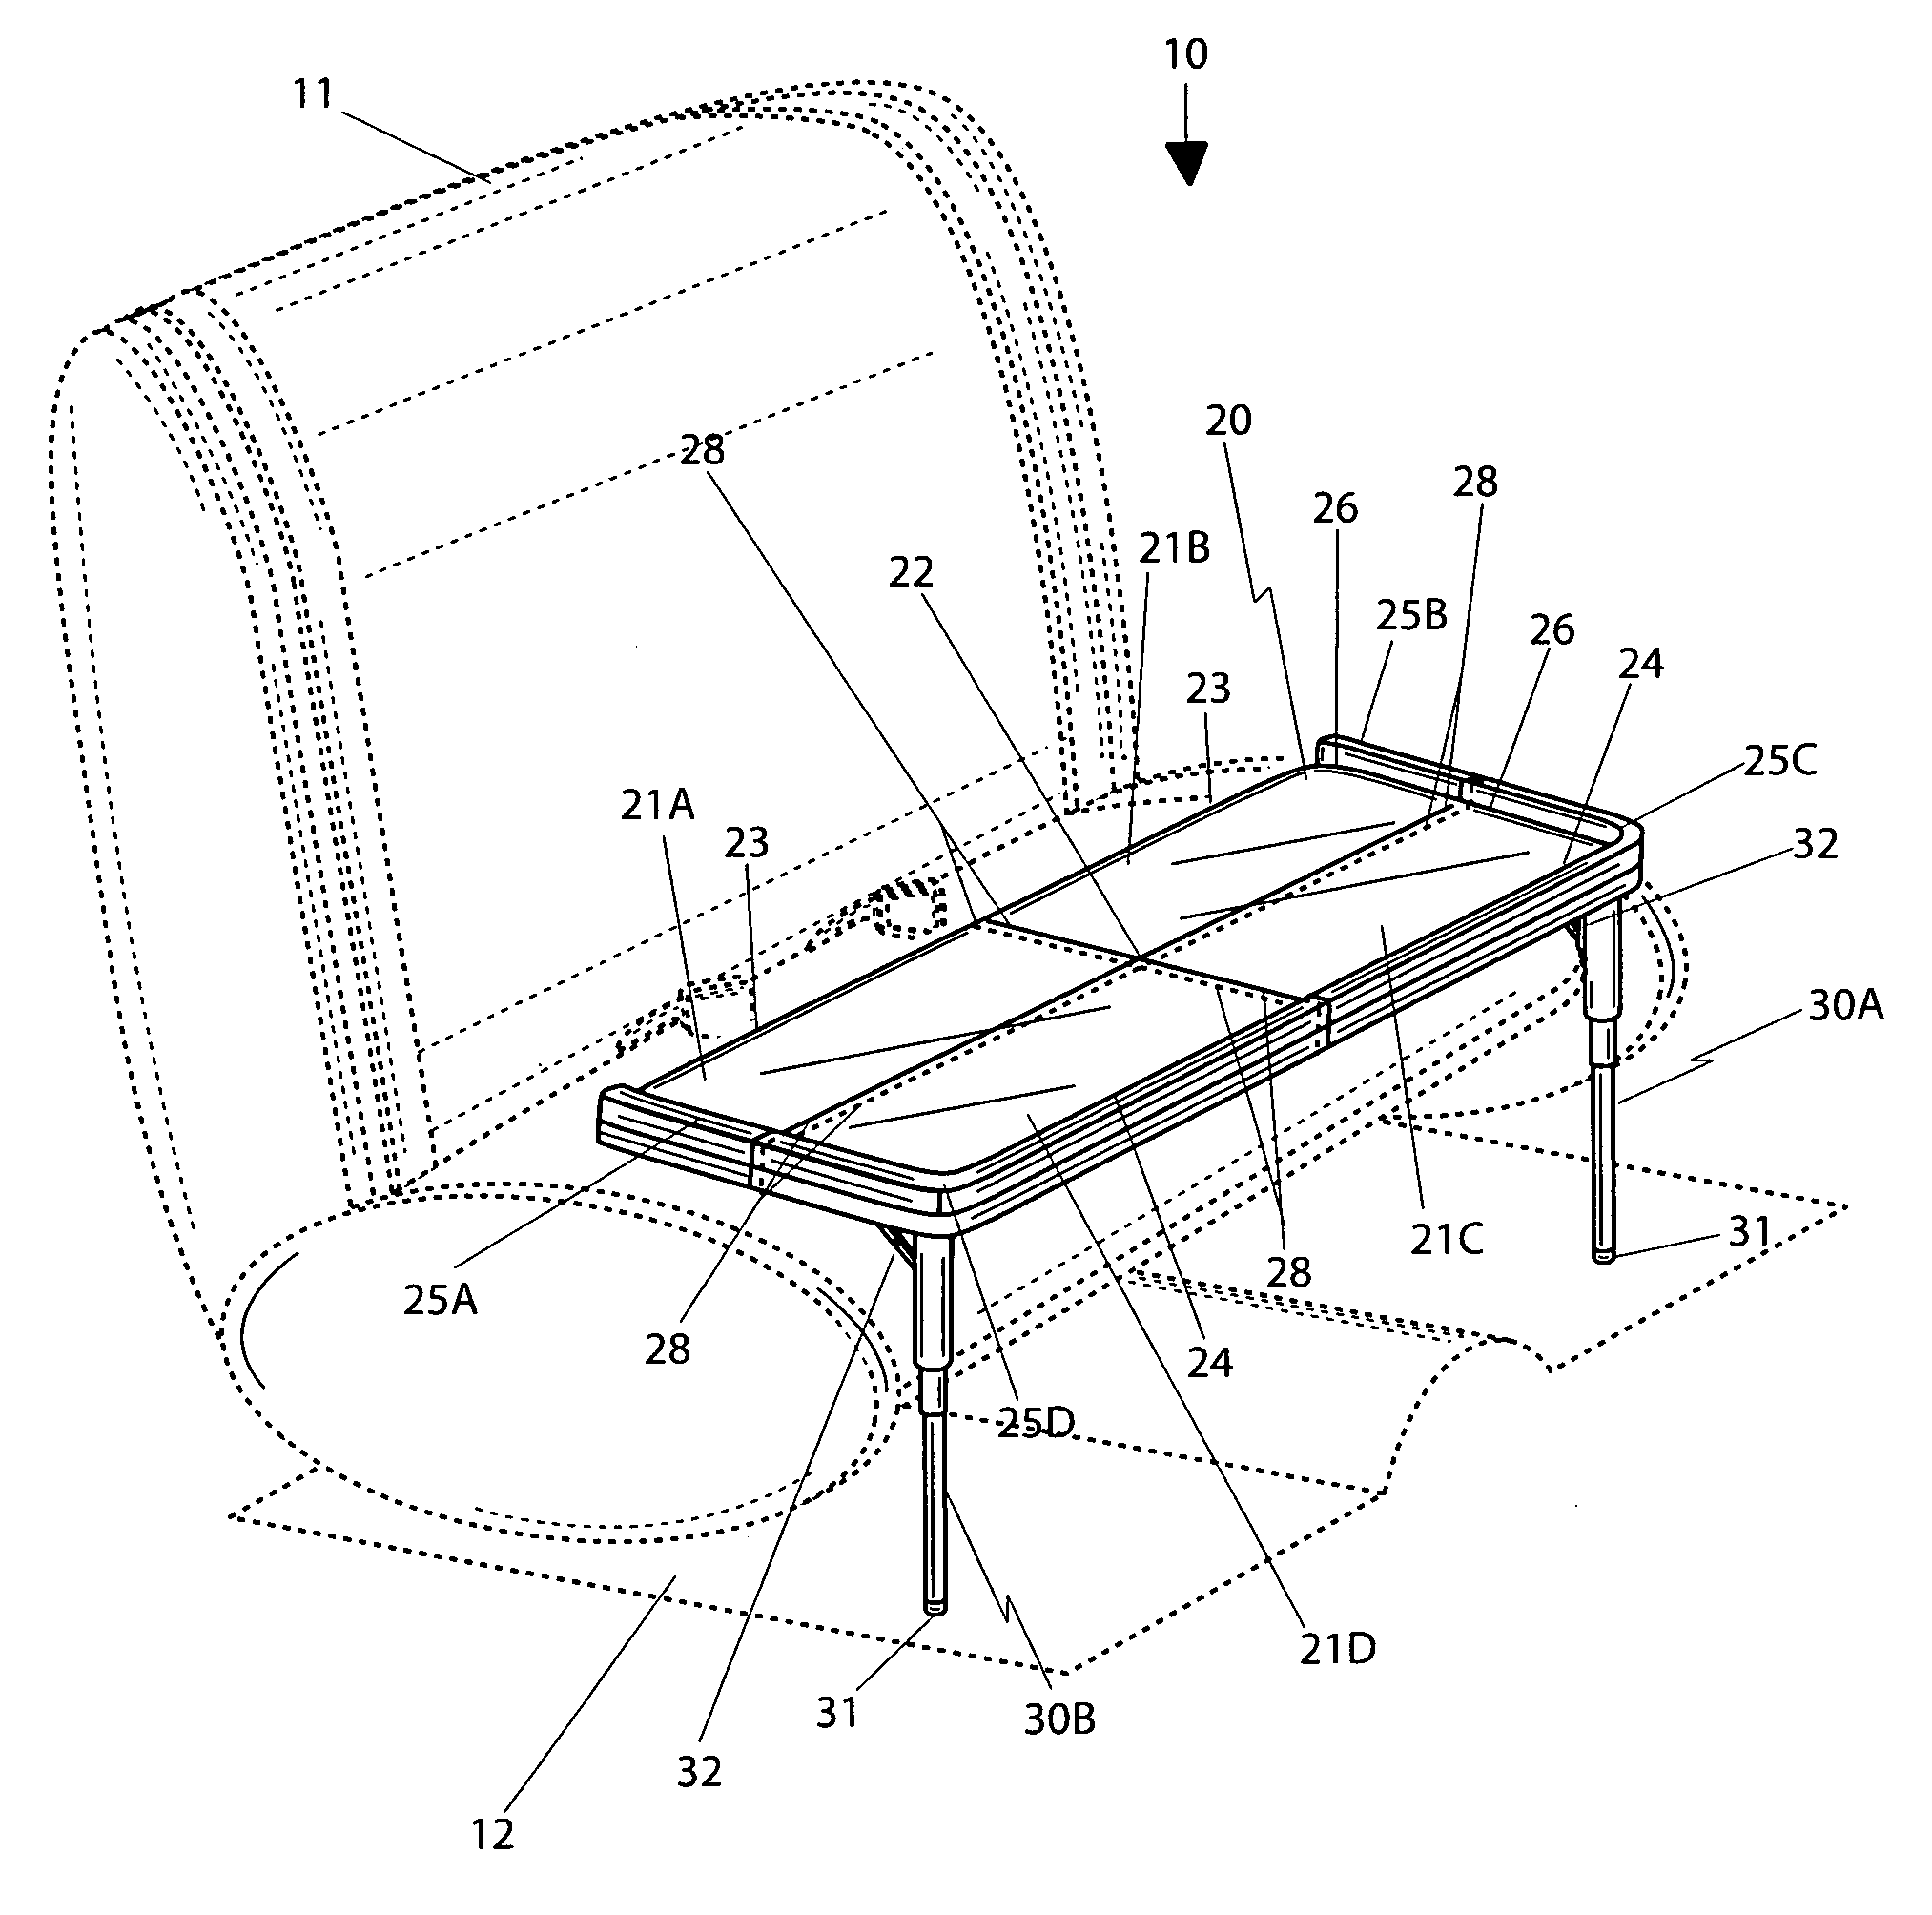 Two-legged table for vehicles